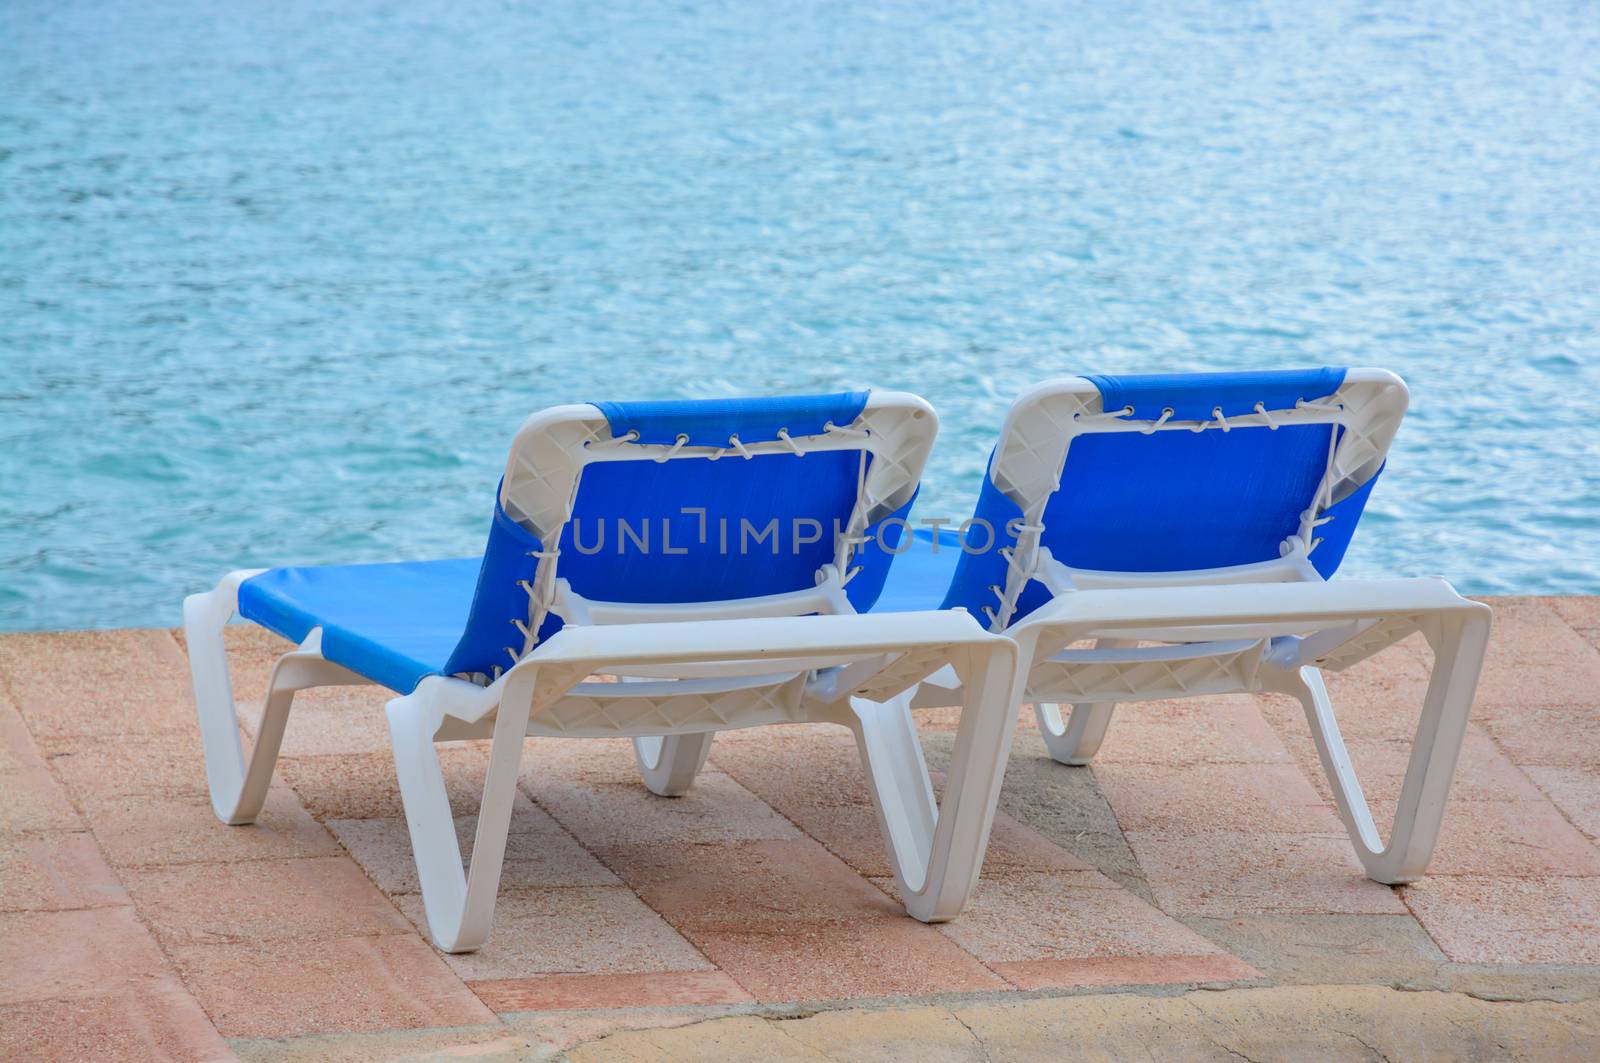 Two empty blue lounge chairs by the ocean.